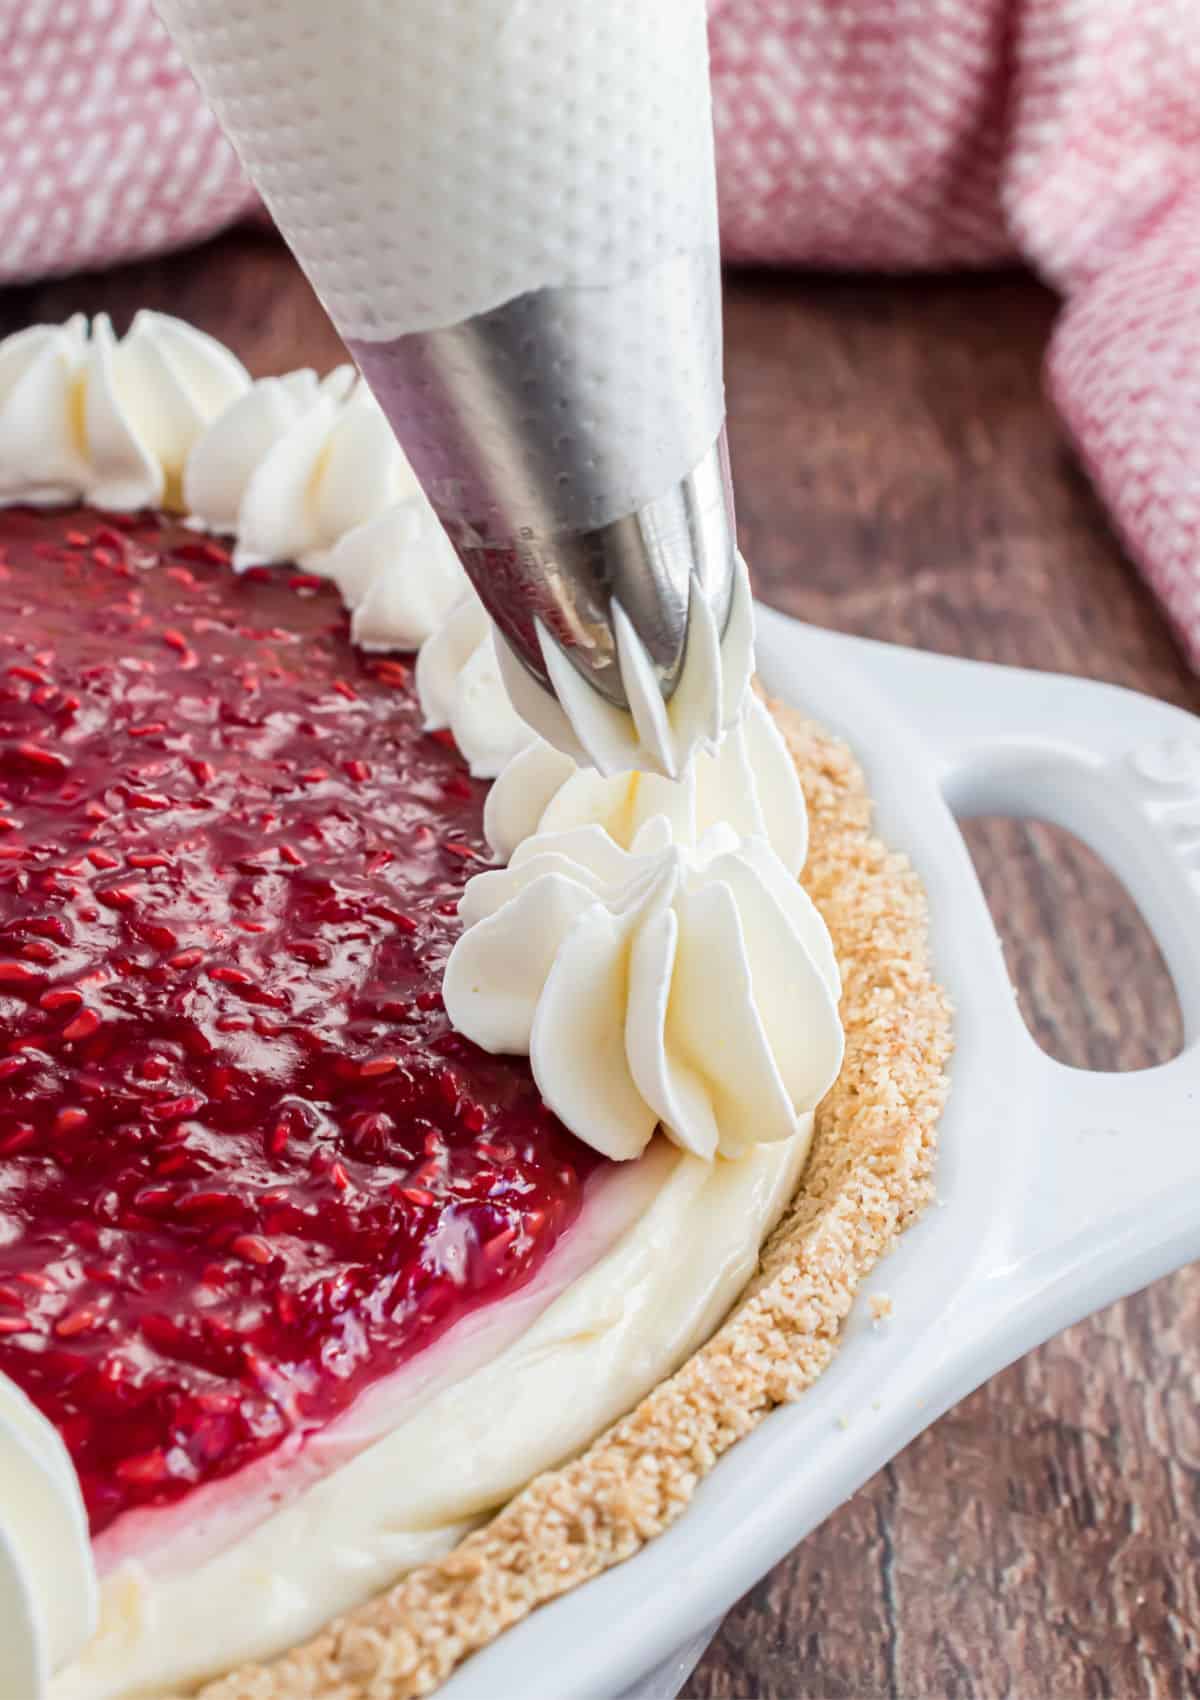 Whipped cream being piped onto a raspberry cheesecake.